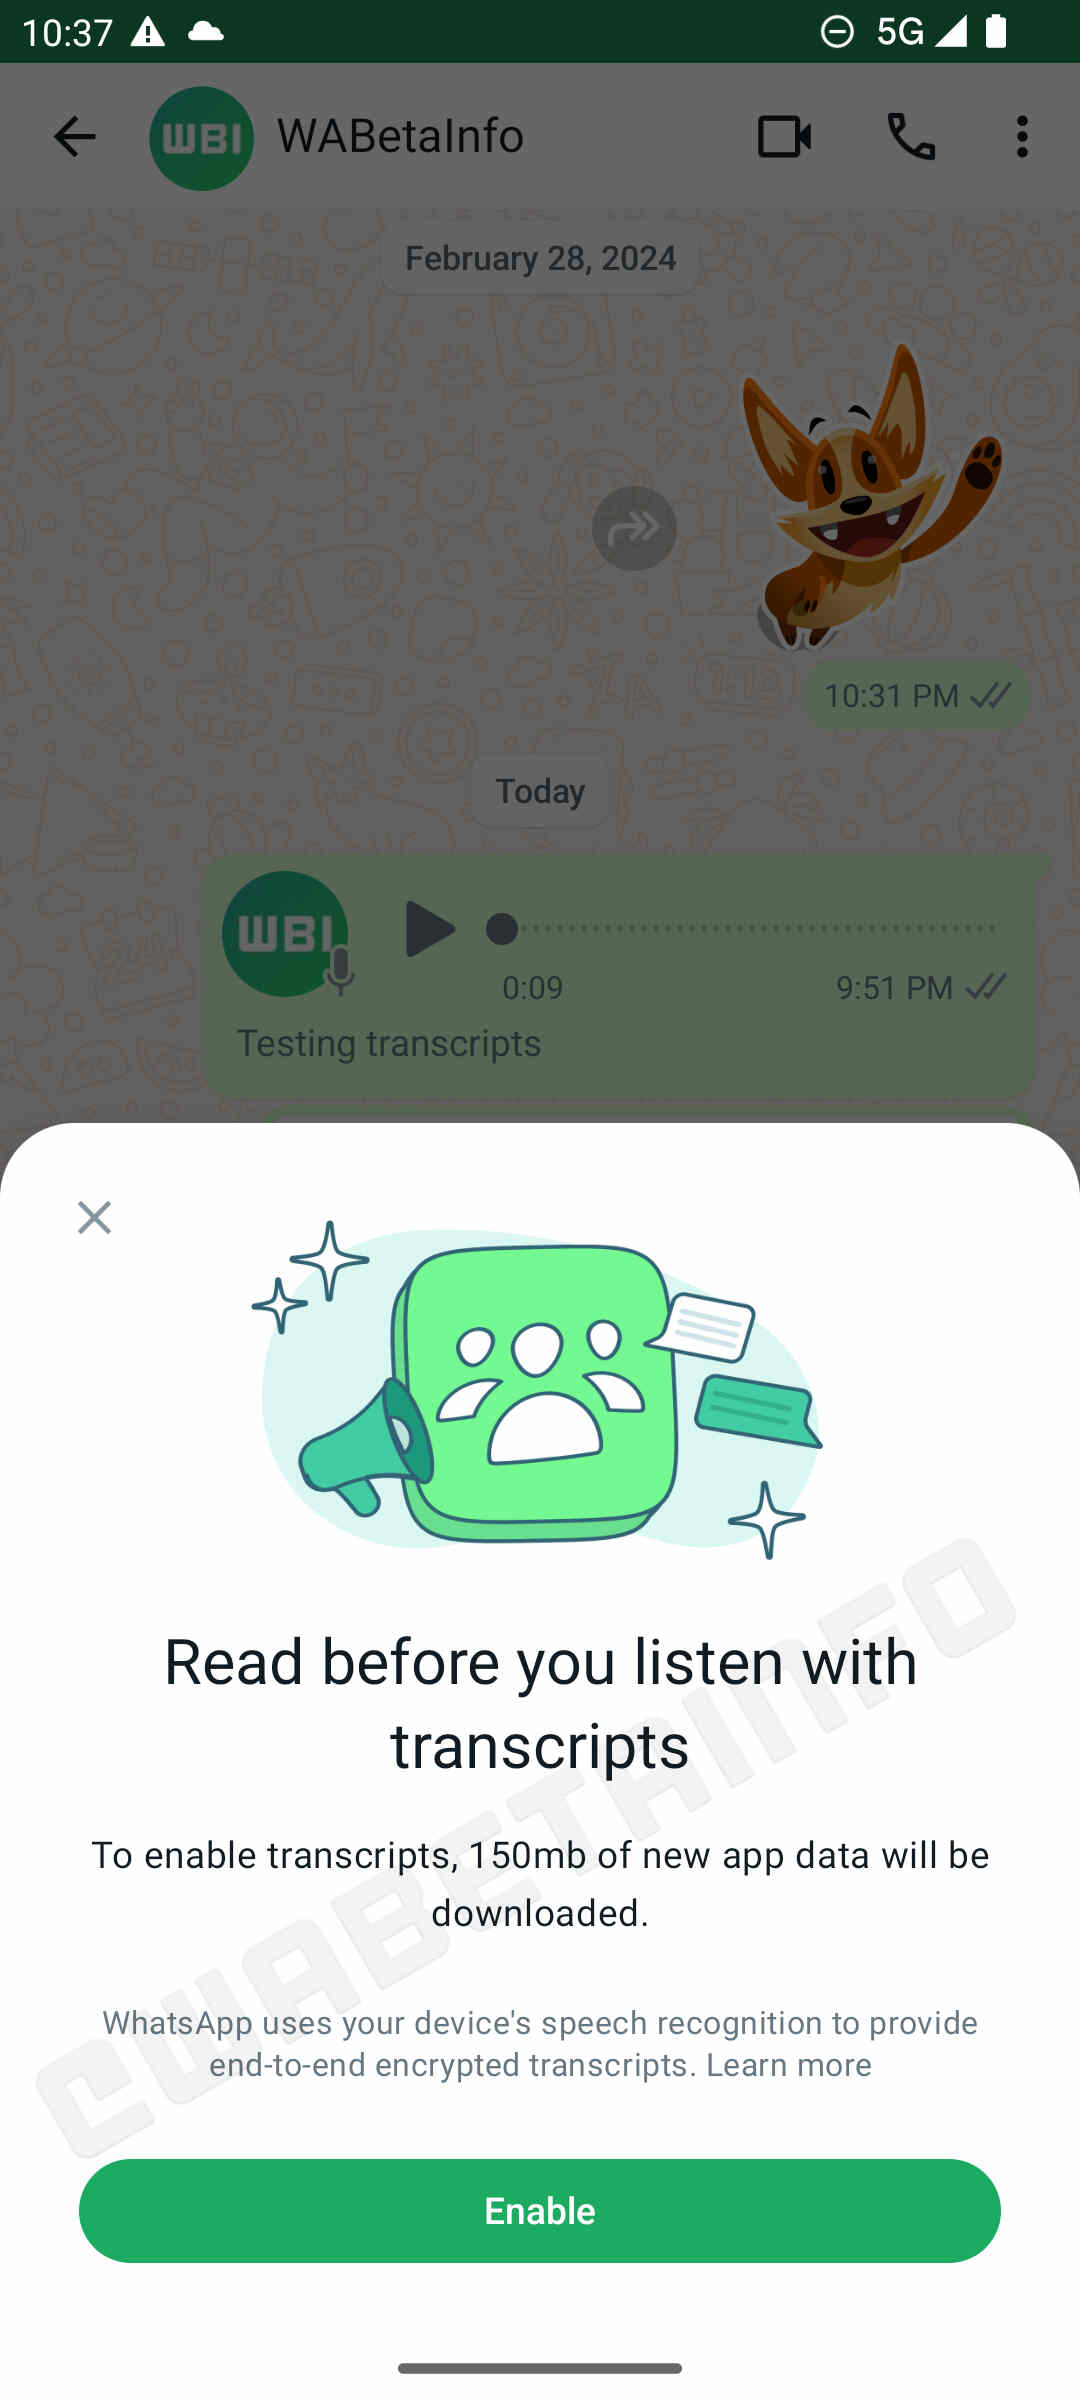 voice transcribing feature for Whatsapp